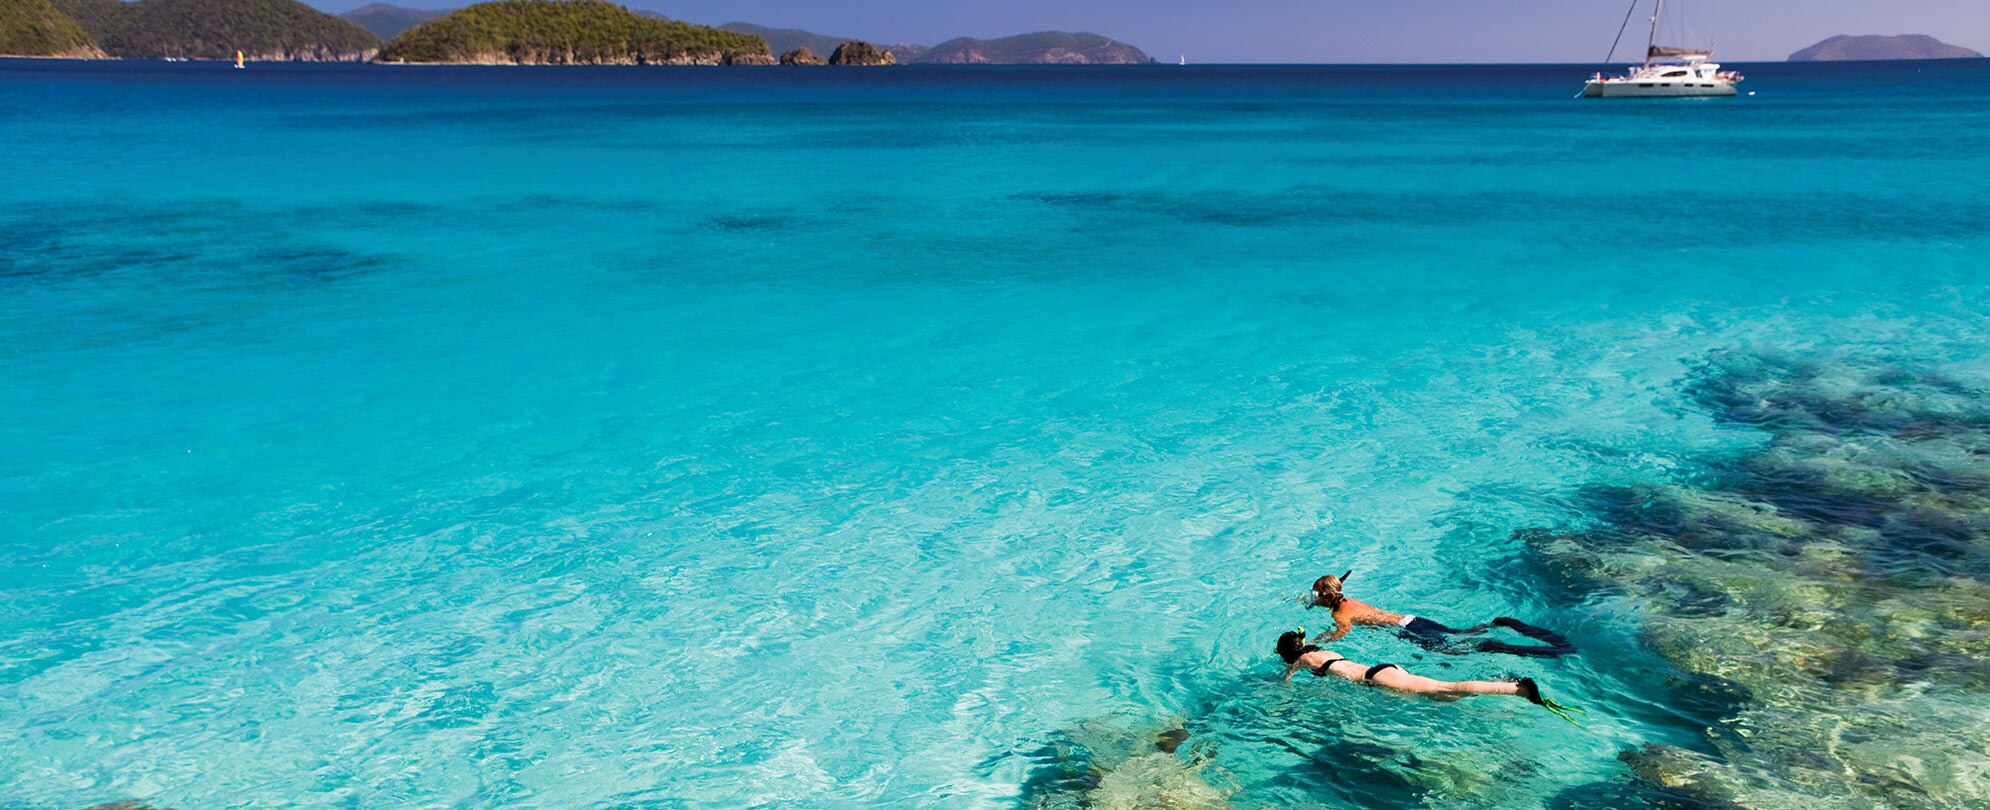 A couple is snorkeling in the Caribbean Sea.